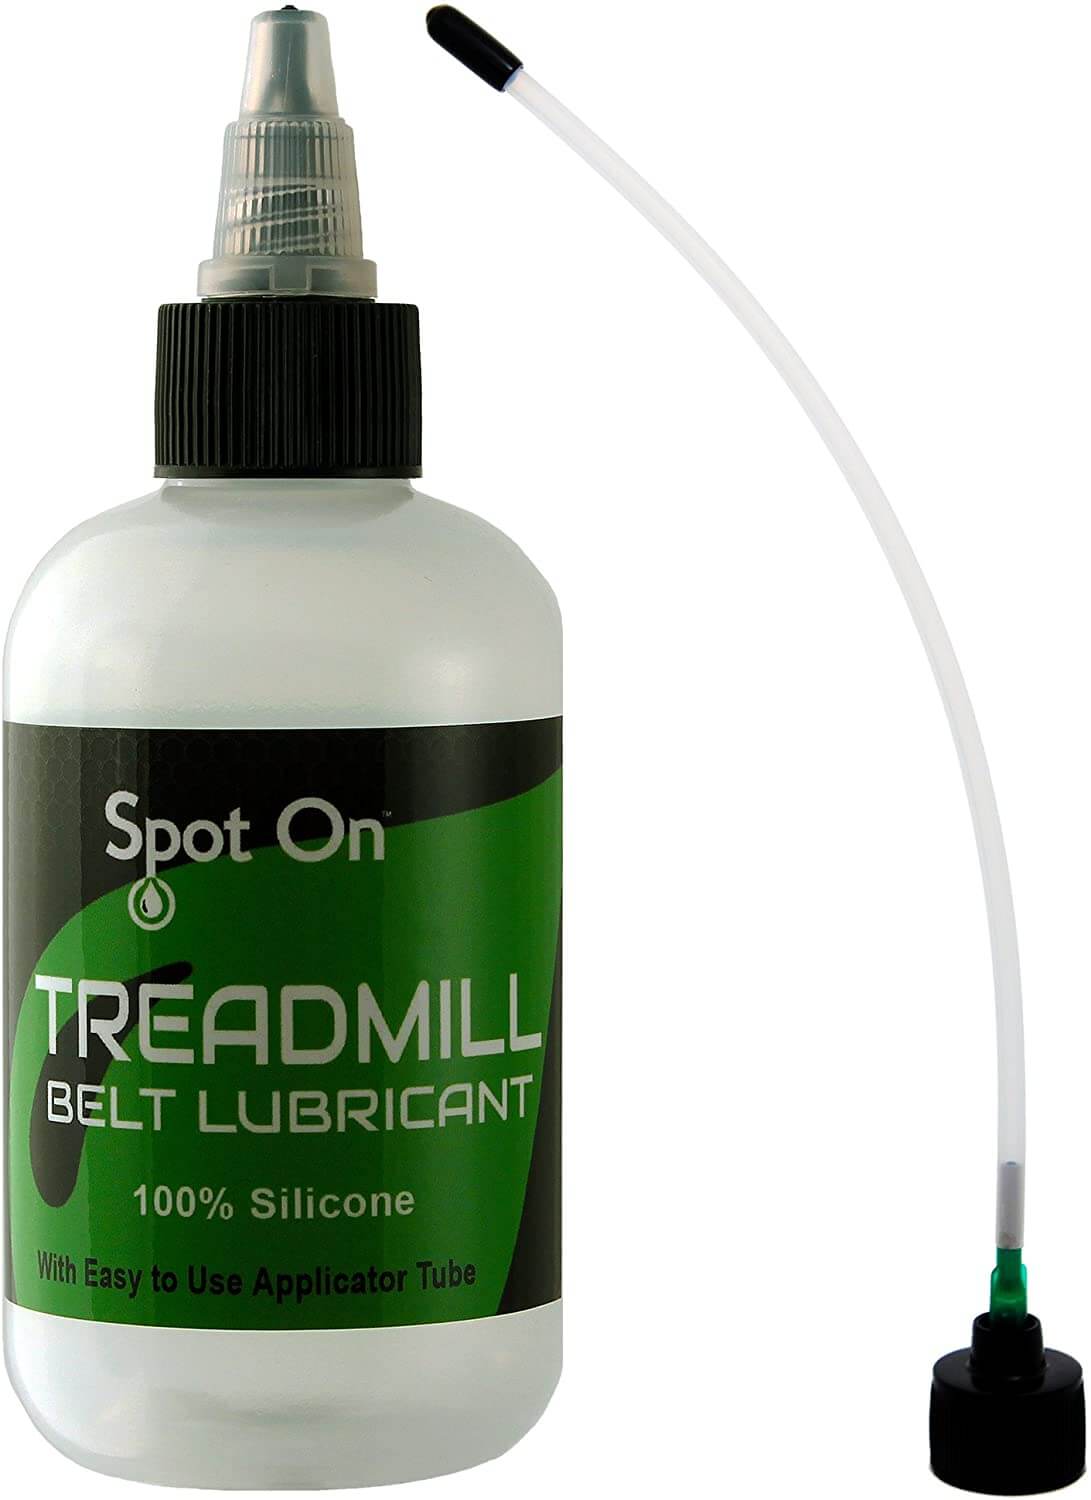 Spot On 100% Silicone Belt Lubricant review